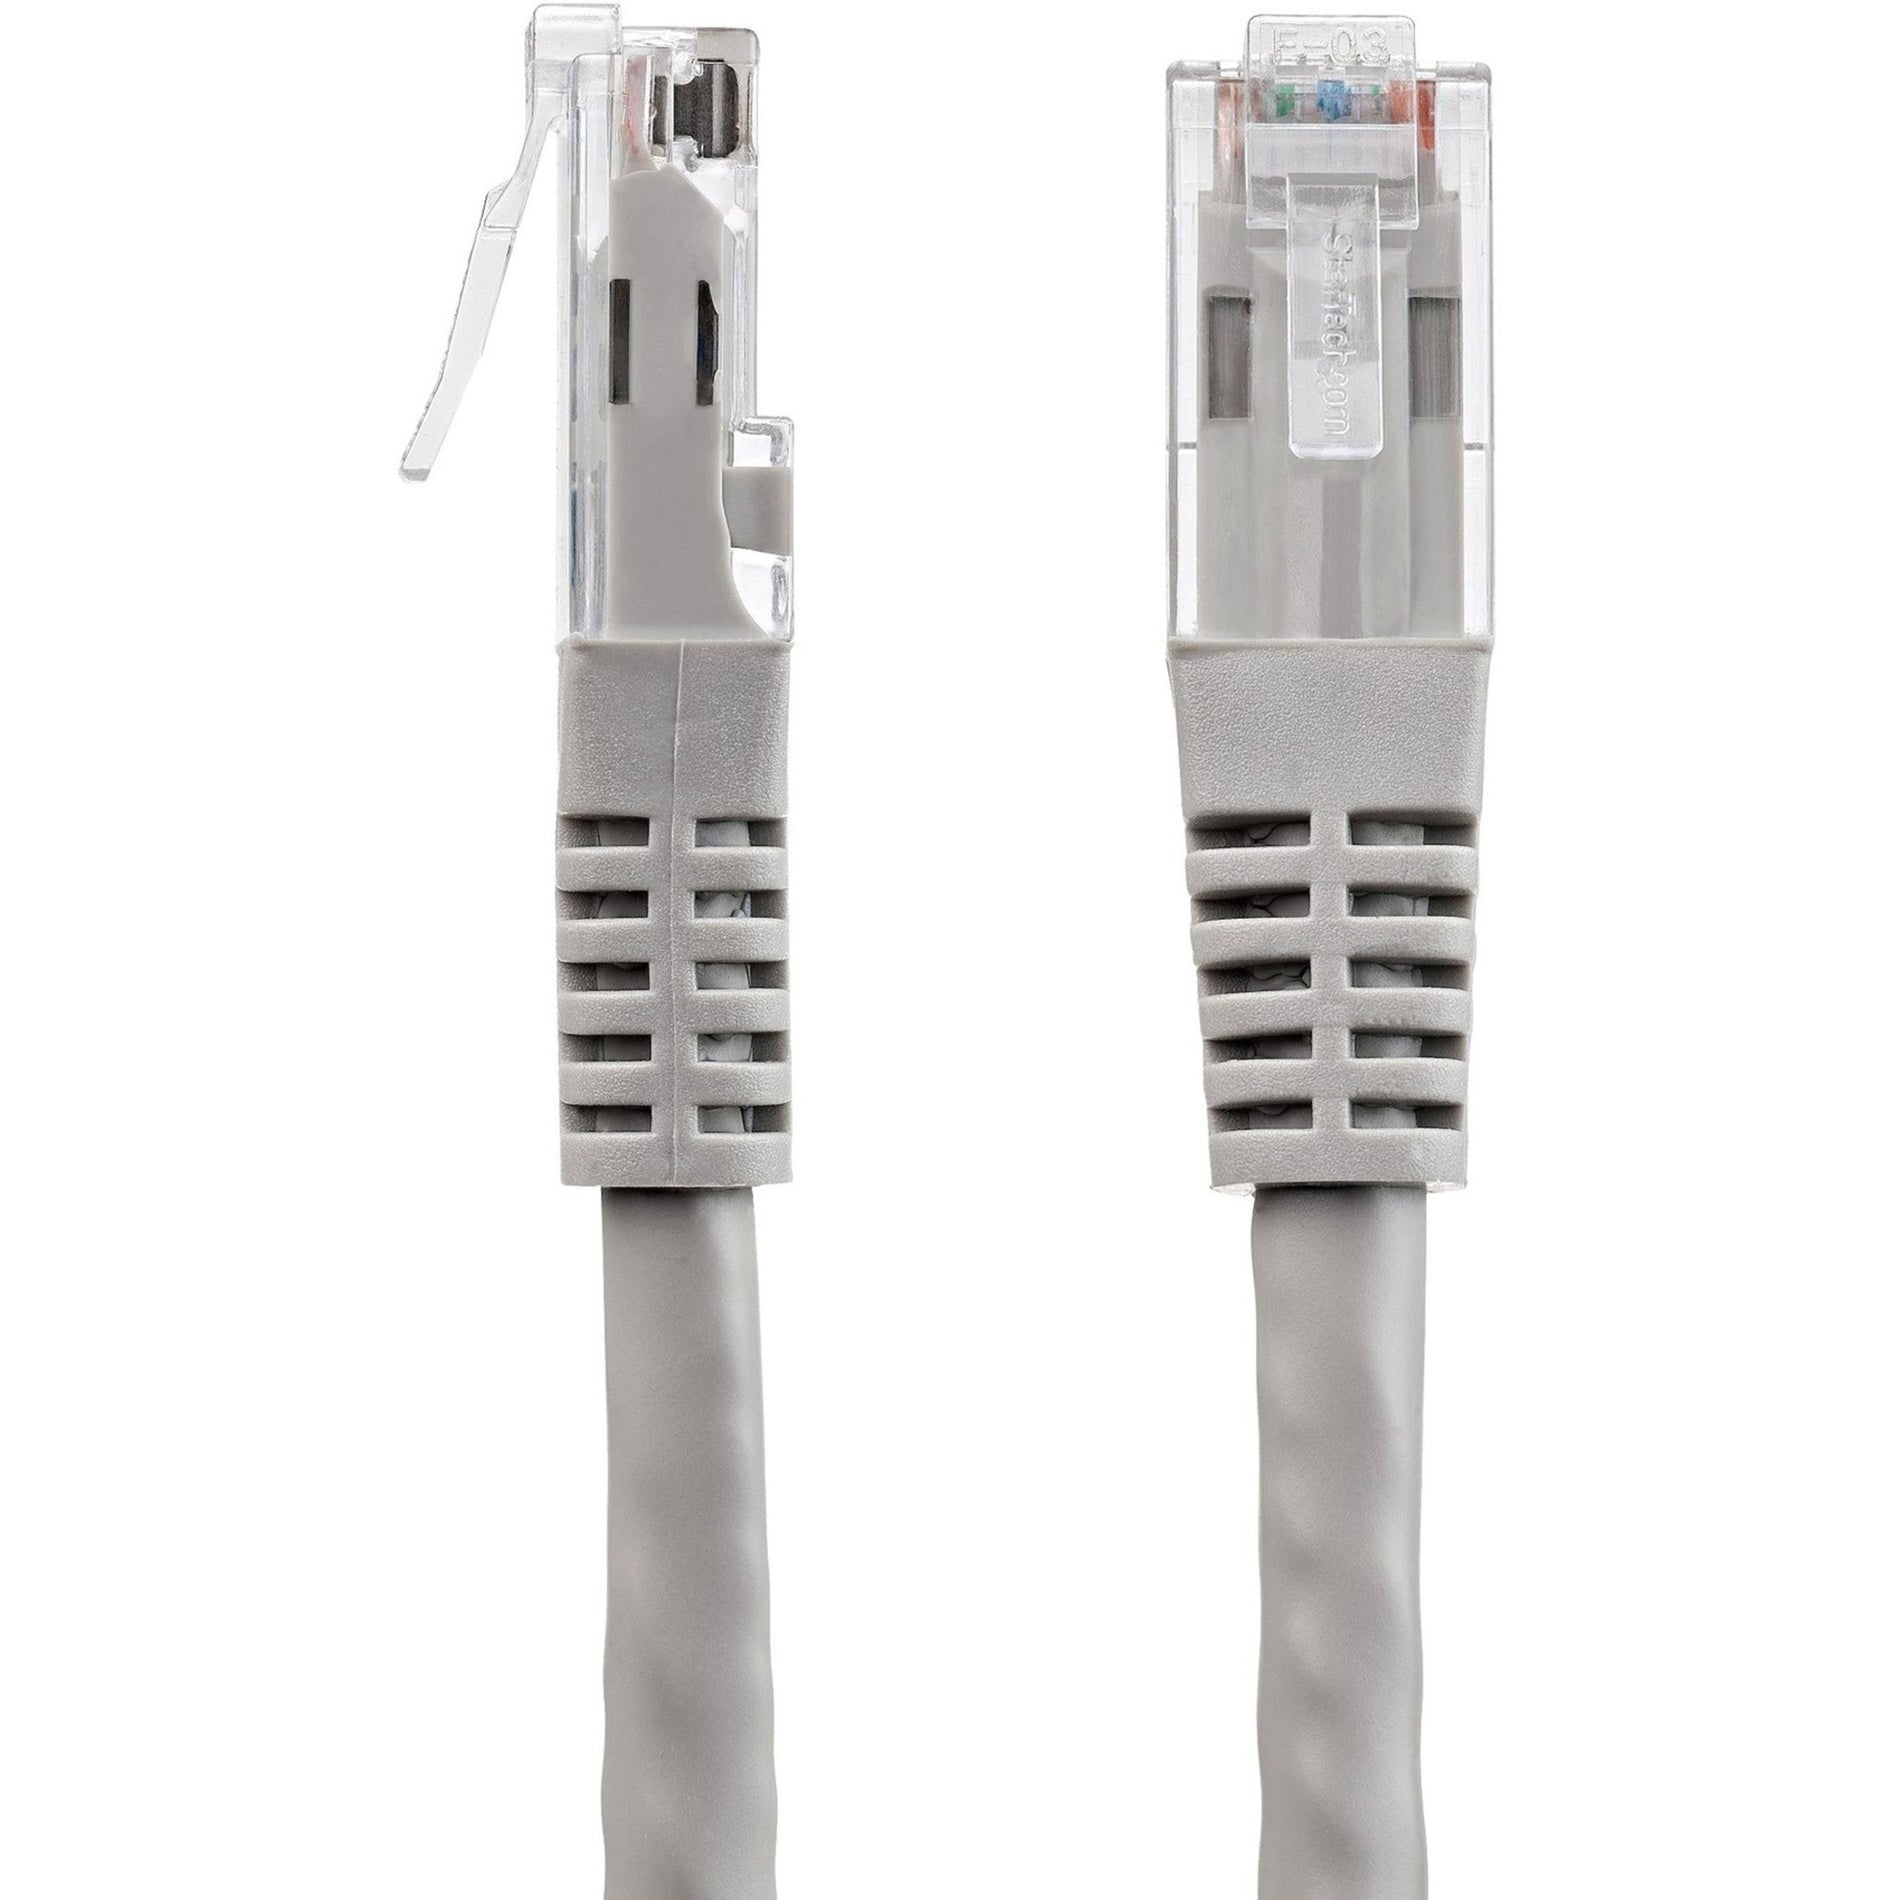 StarTech.com C6PATCH35GR 35ft Gray Molded Cat6 UTP Patch Cable ETL Verified, 10 Gbit/s Data Transfer Rate, Snagless Boot